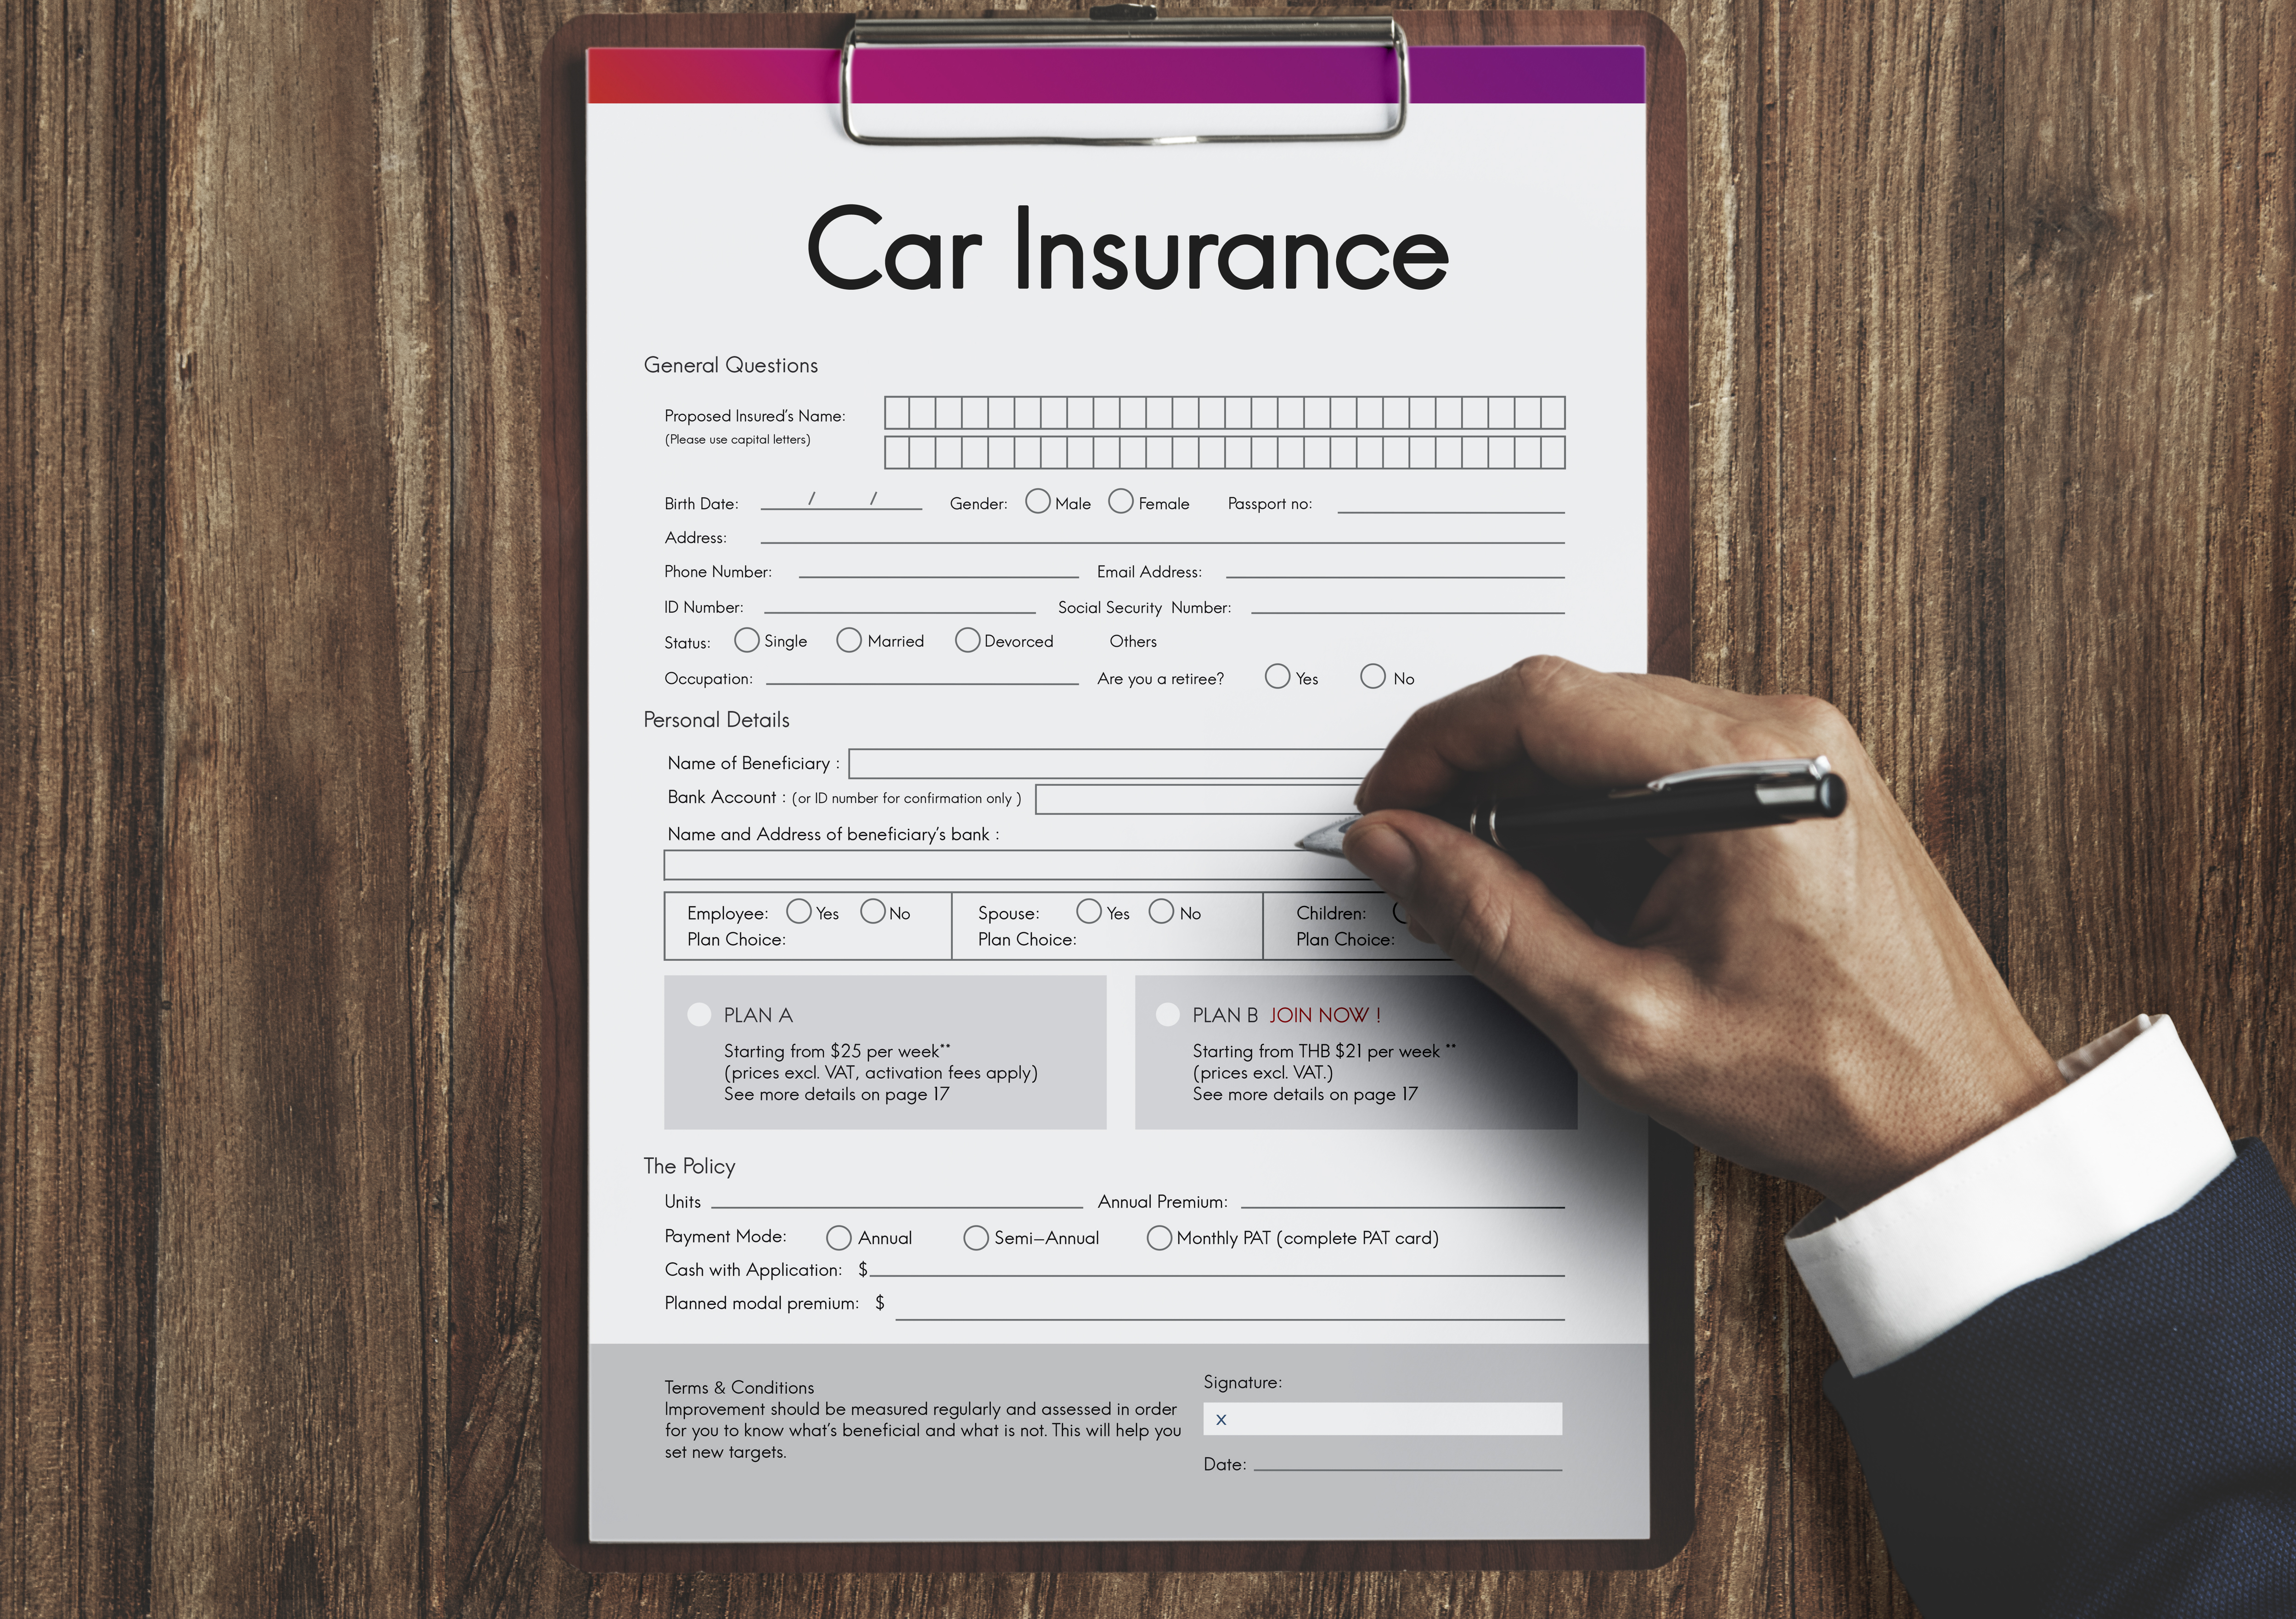 Does Paying My Car Insurance Help Improve My Credit?